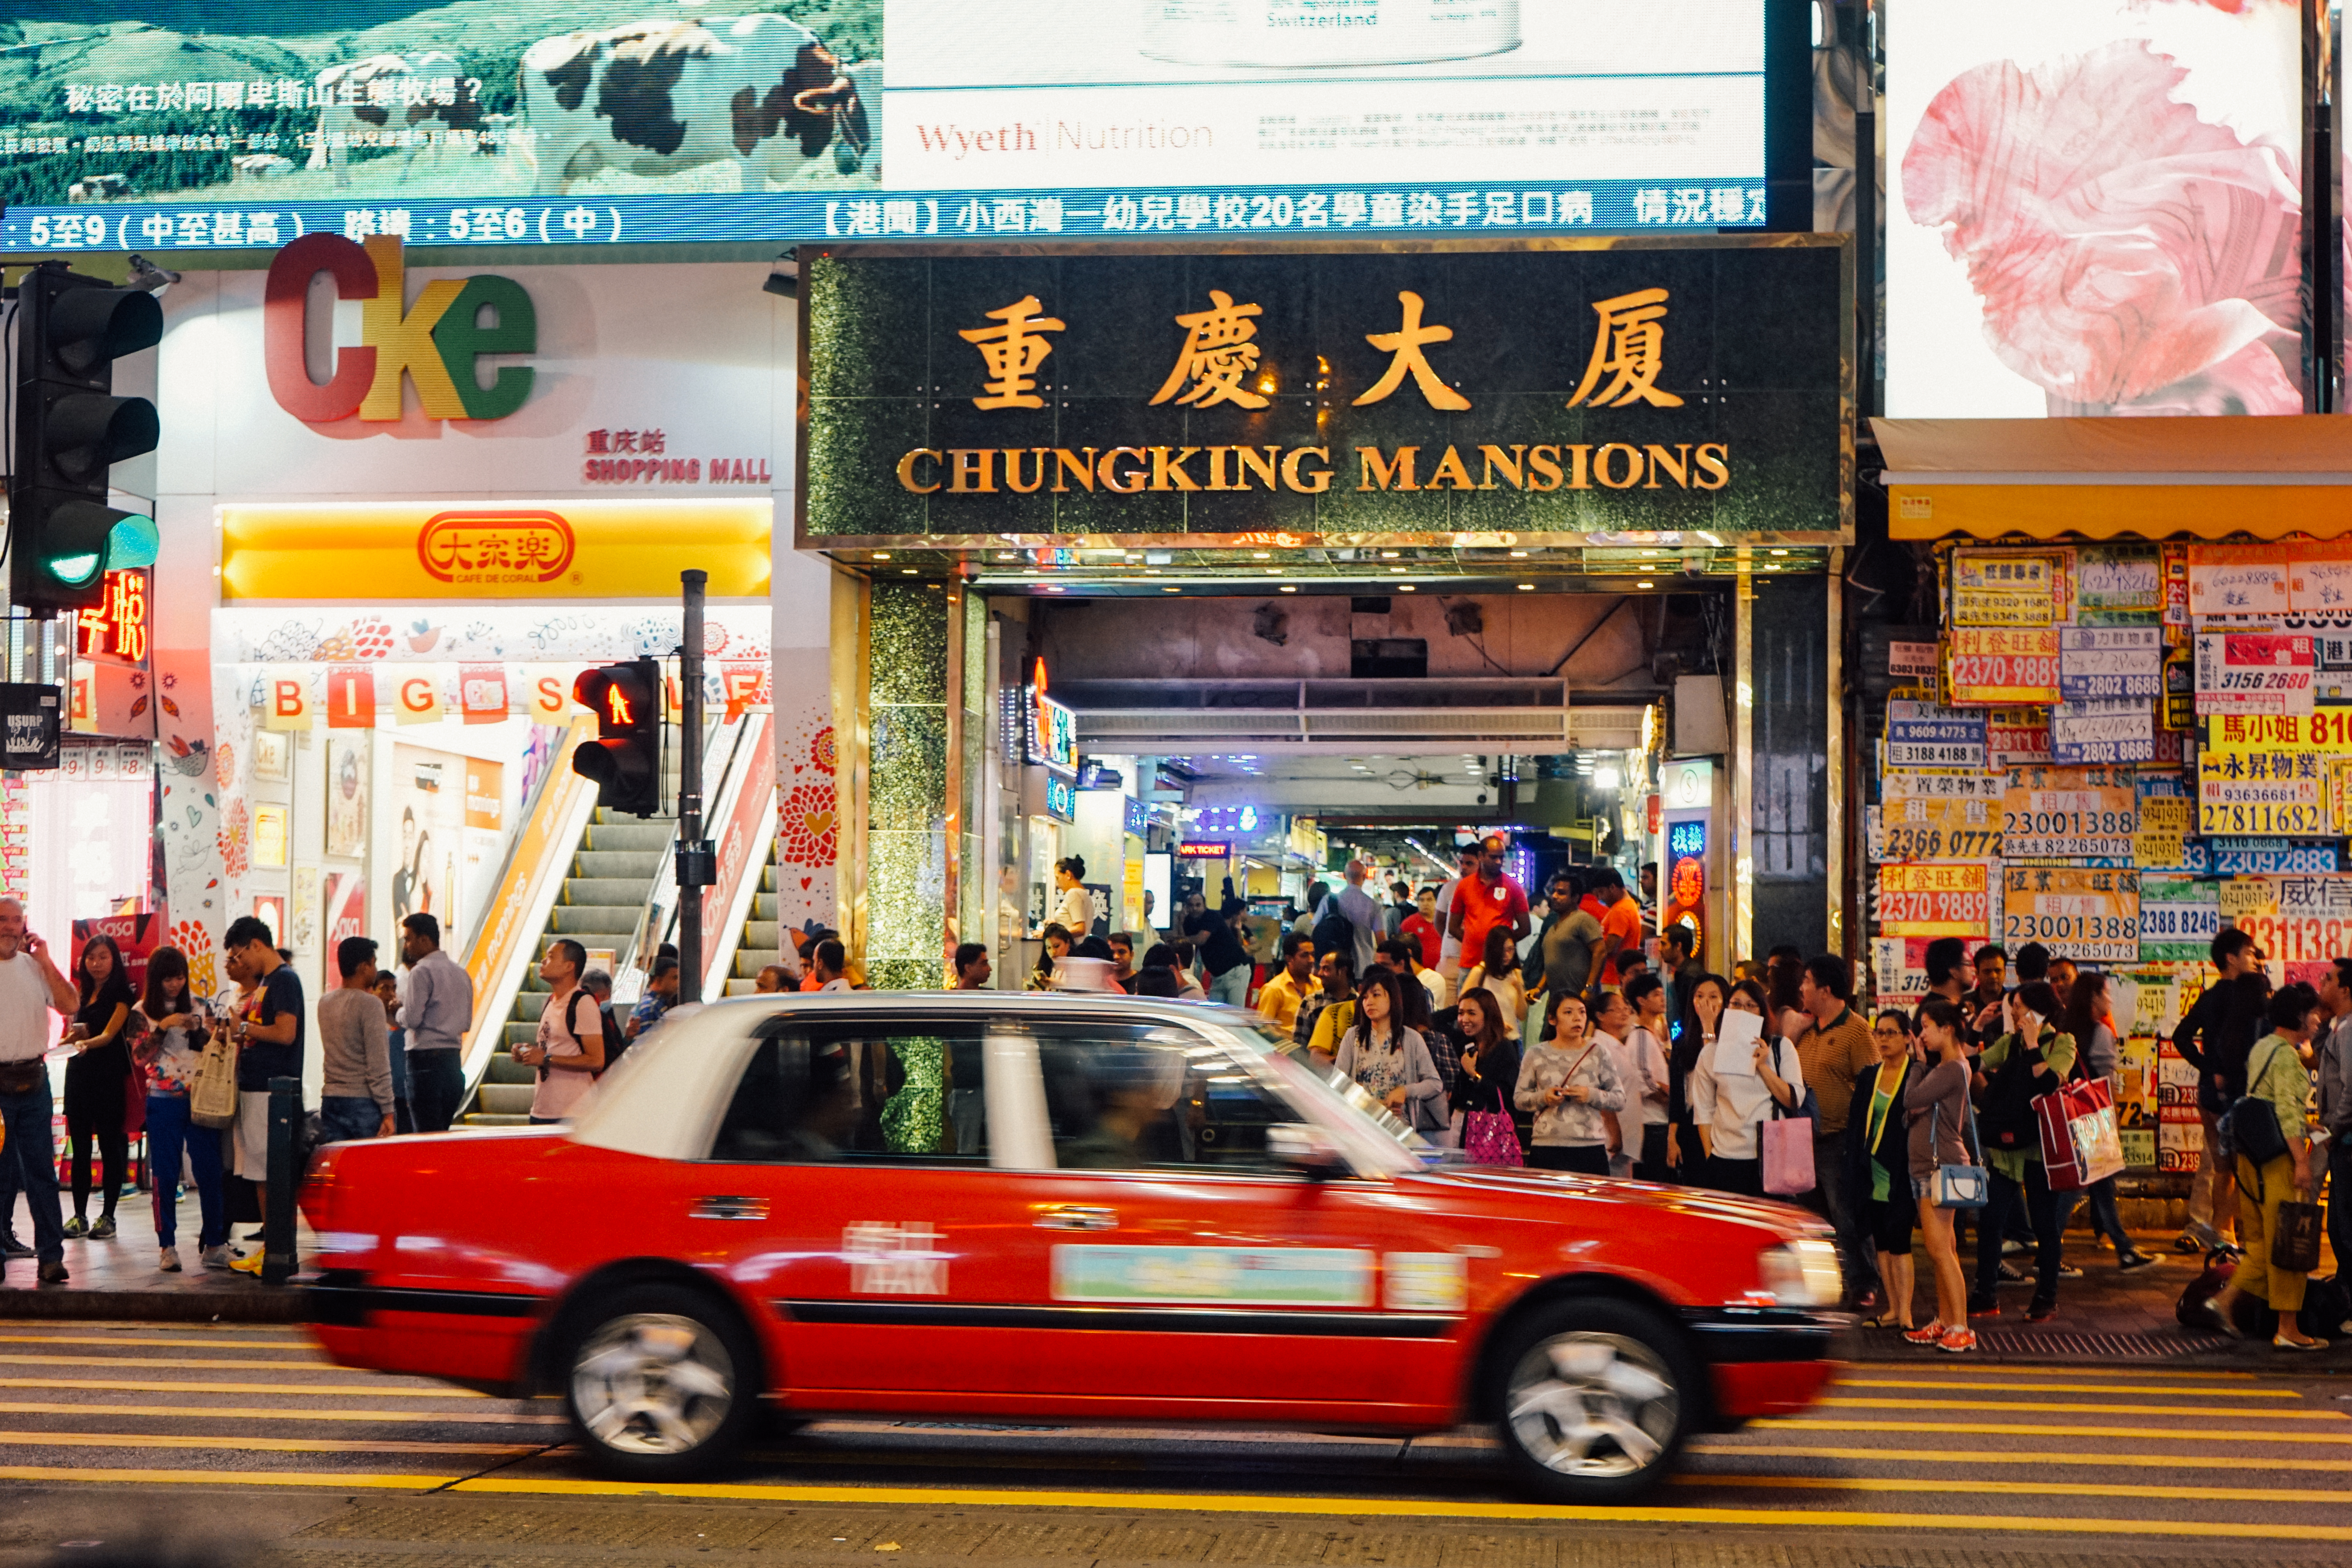  A red taxi drives past tthe busy exterior of the Chungking Mansions in Hong Kong. These squalid, overcrowded towers house many of the territory's 10,000 asylum seekers. (Shadowproof / Zachary Senn)